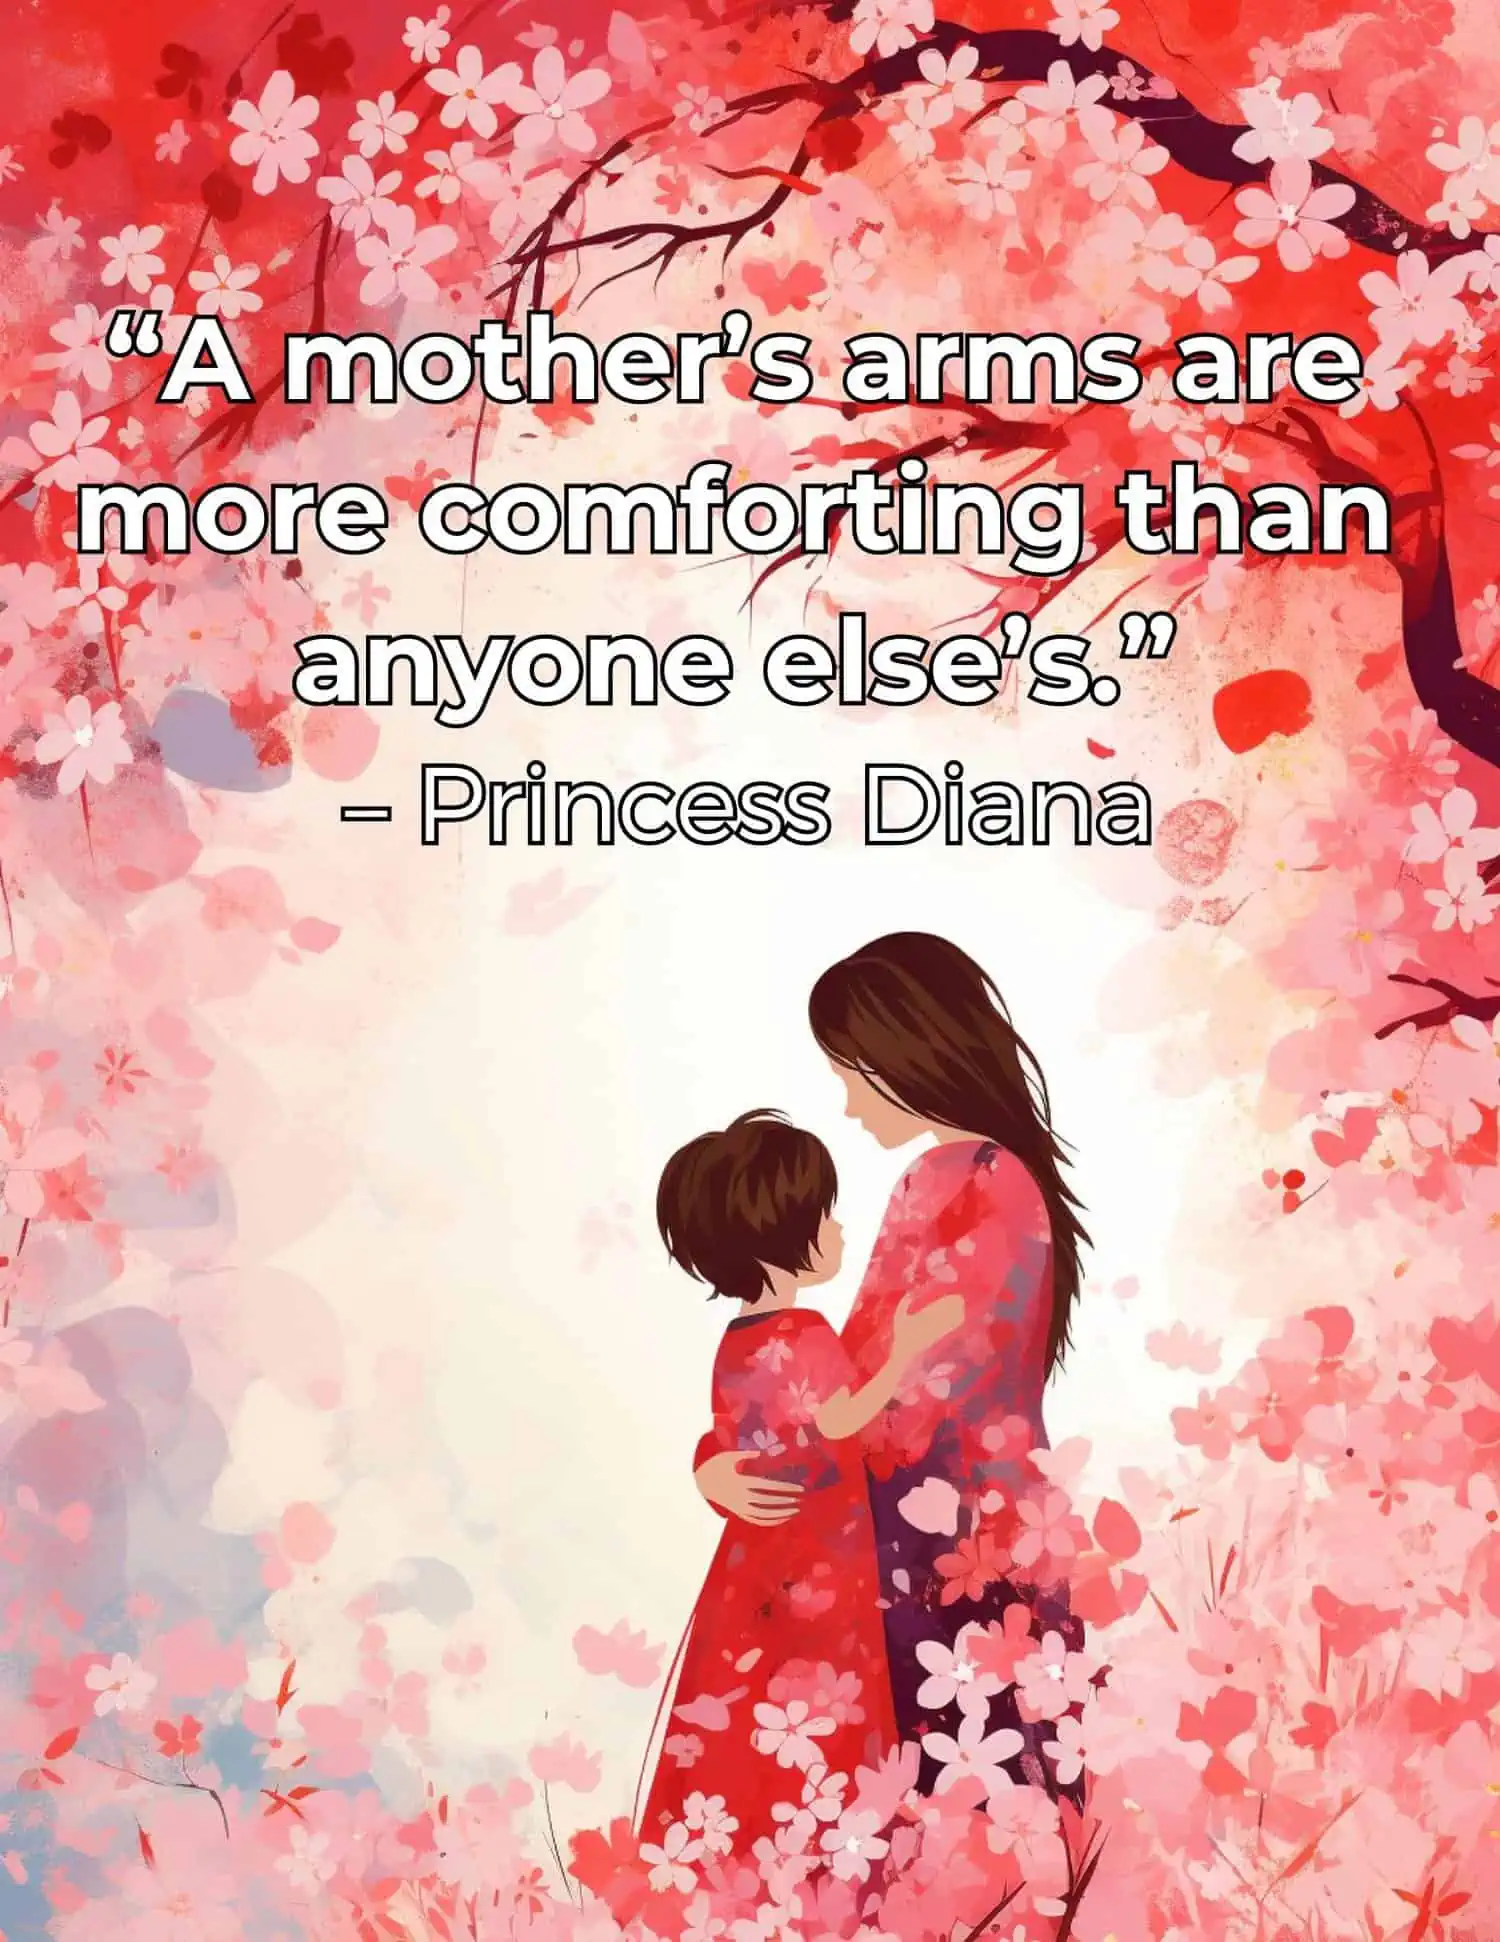 Timeless quotes celebrating the essence of motherhood on her special day.